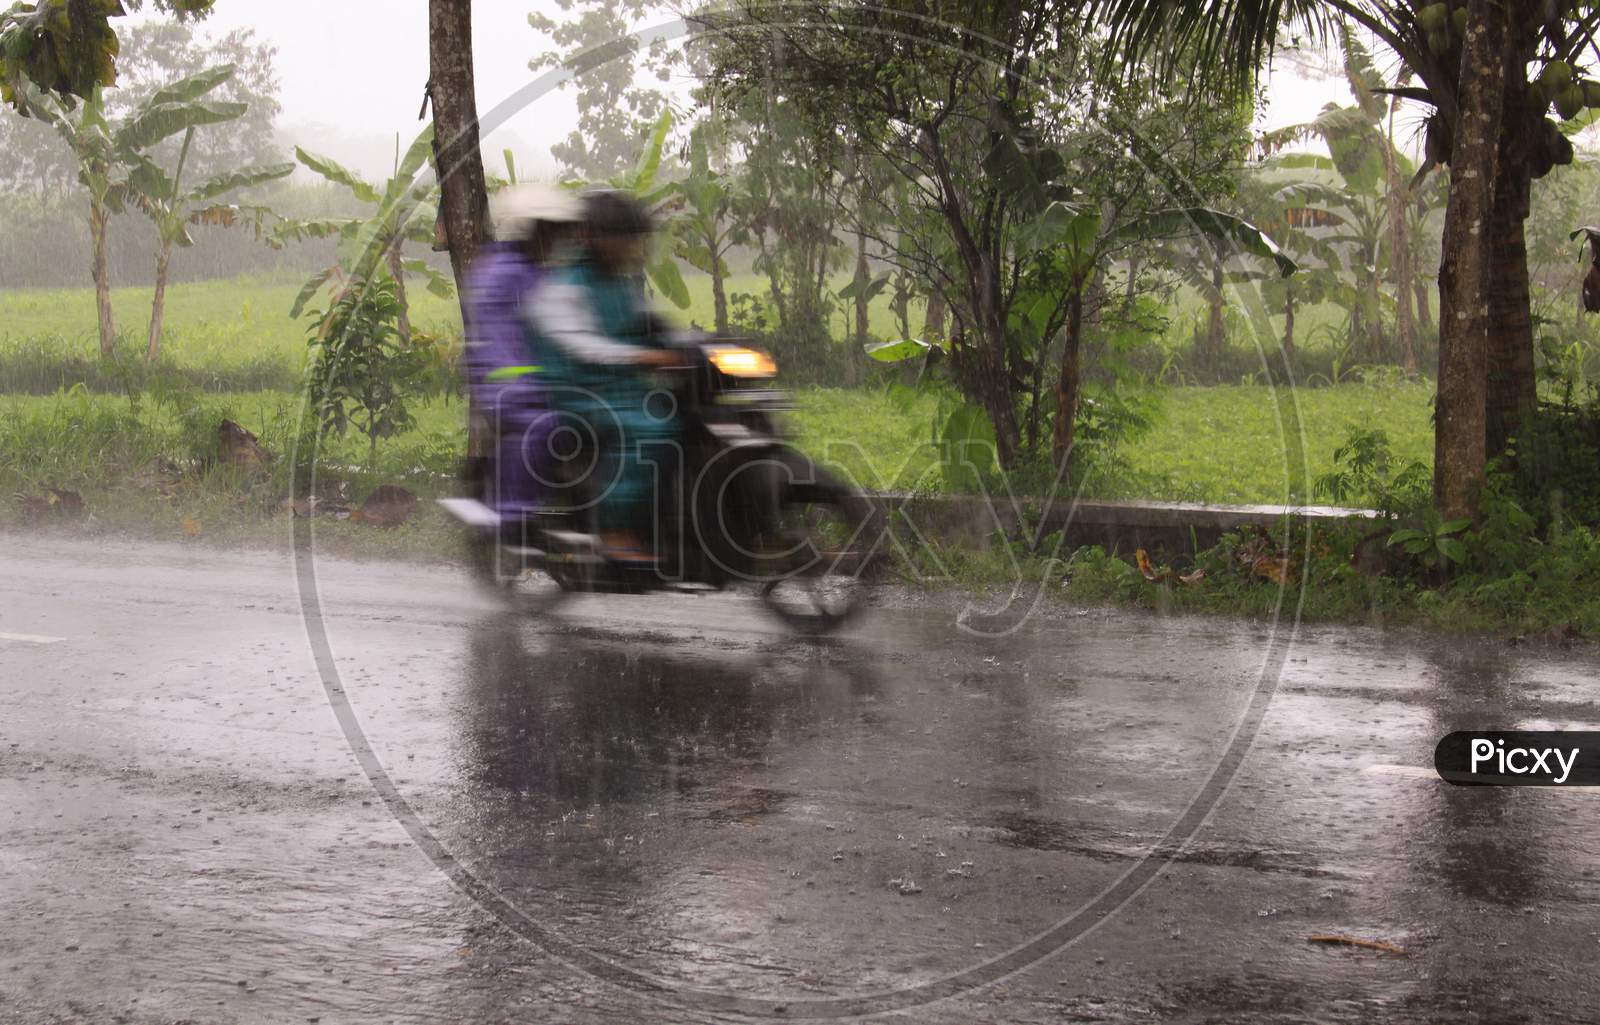 Fast Motorcycle With Riders Blur During Heavy Rain